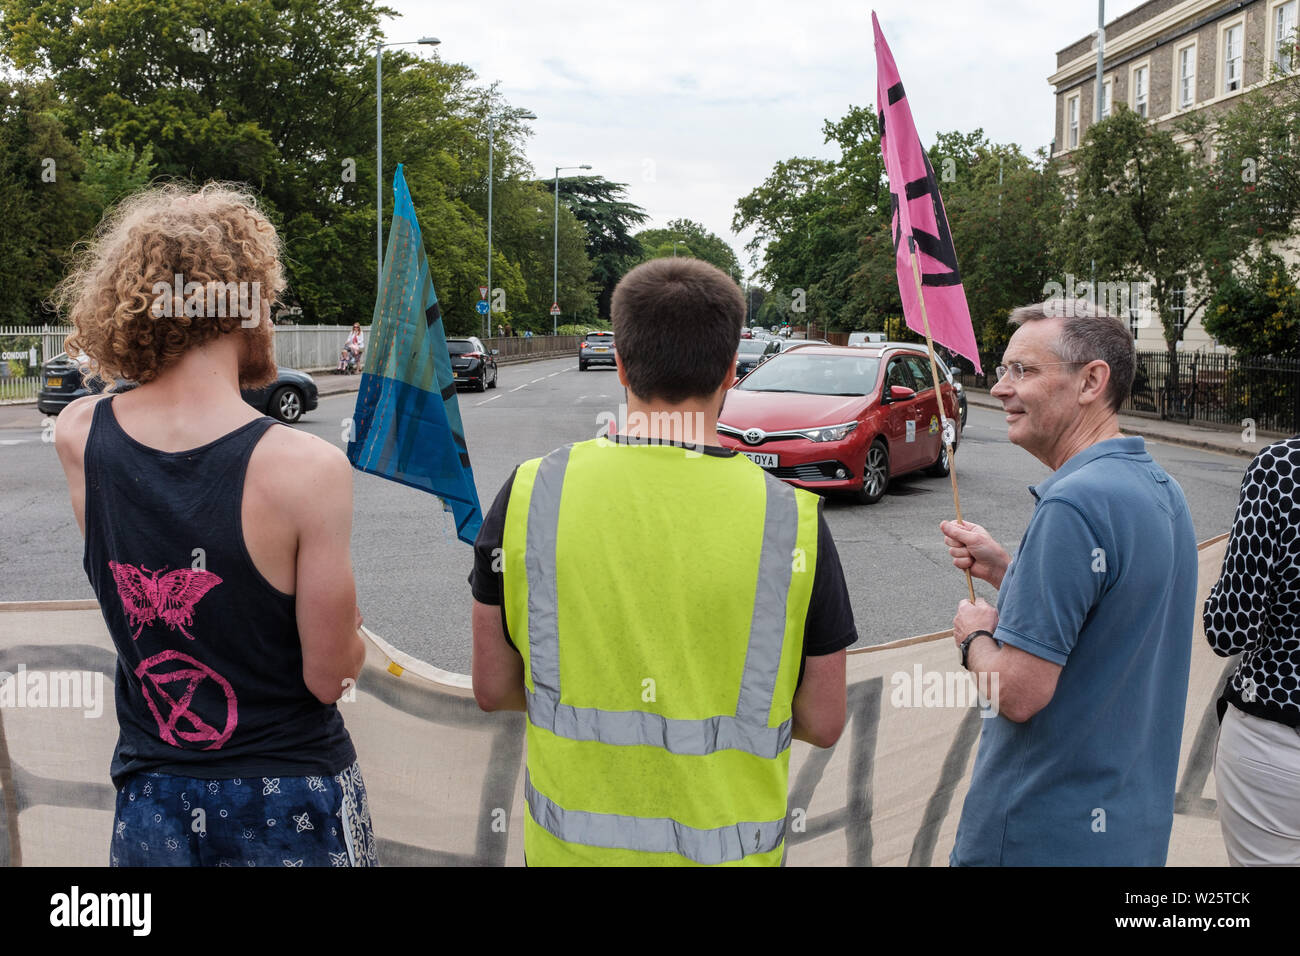 Cambridge, UK. 6th July 2019. Extinction Rebellion Cambridge stage ‘Streets for Life’, a non-violent protest for climate change in Cambridge, UK. ‘Streets for Life’ is closing several roads in central Cambridge to vehicle traffic whilst creating community orientated activities. CamNews / Alamy Live News. Stock Photo